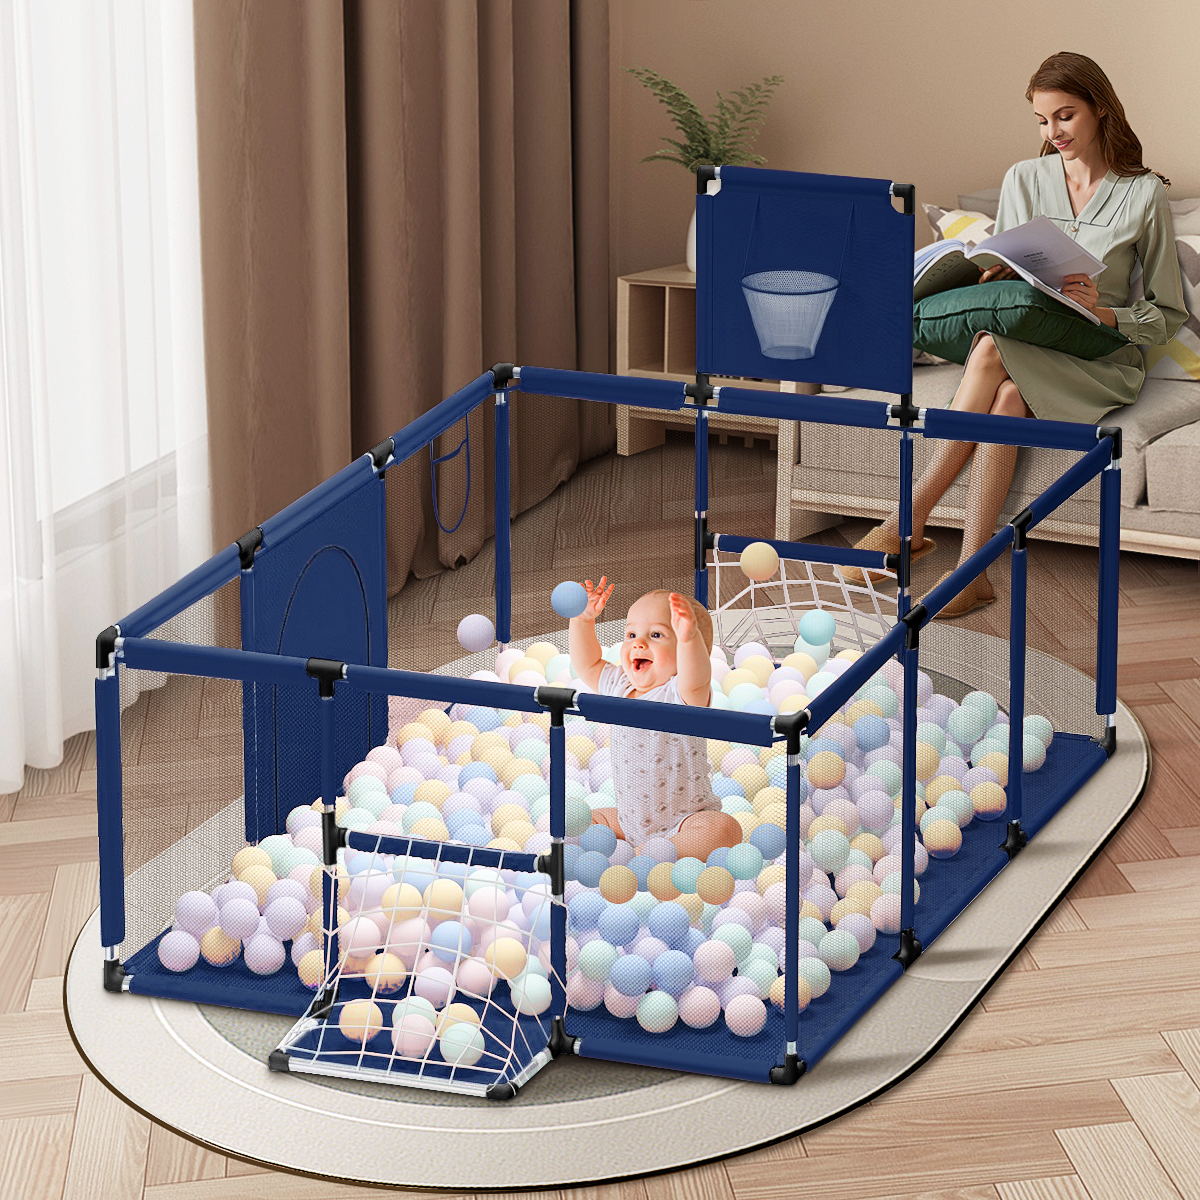 Baby-Playpen-Oxford-Cloth-Children-Infant-Fence-Safety-Barriers-Children-Ball-Pool-Baby-Playground-G-1935212-4